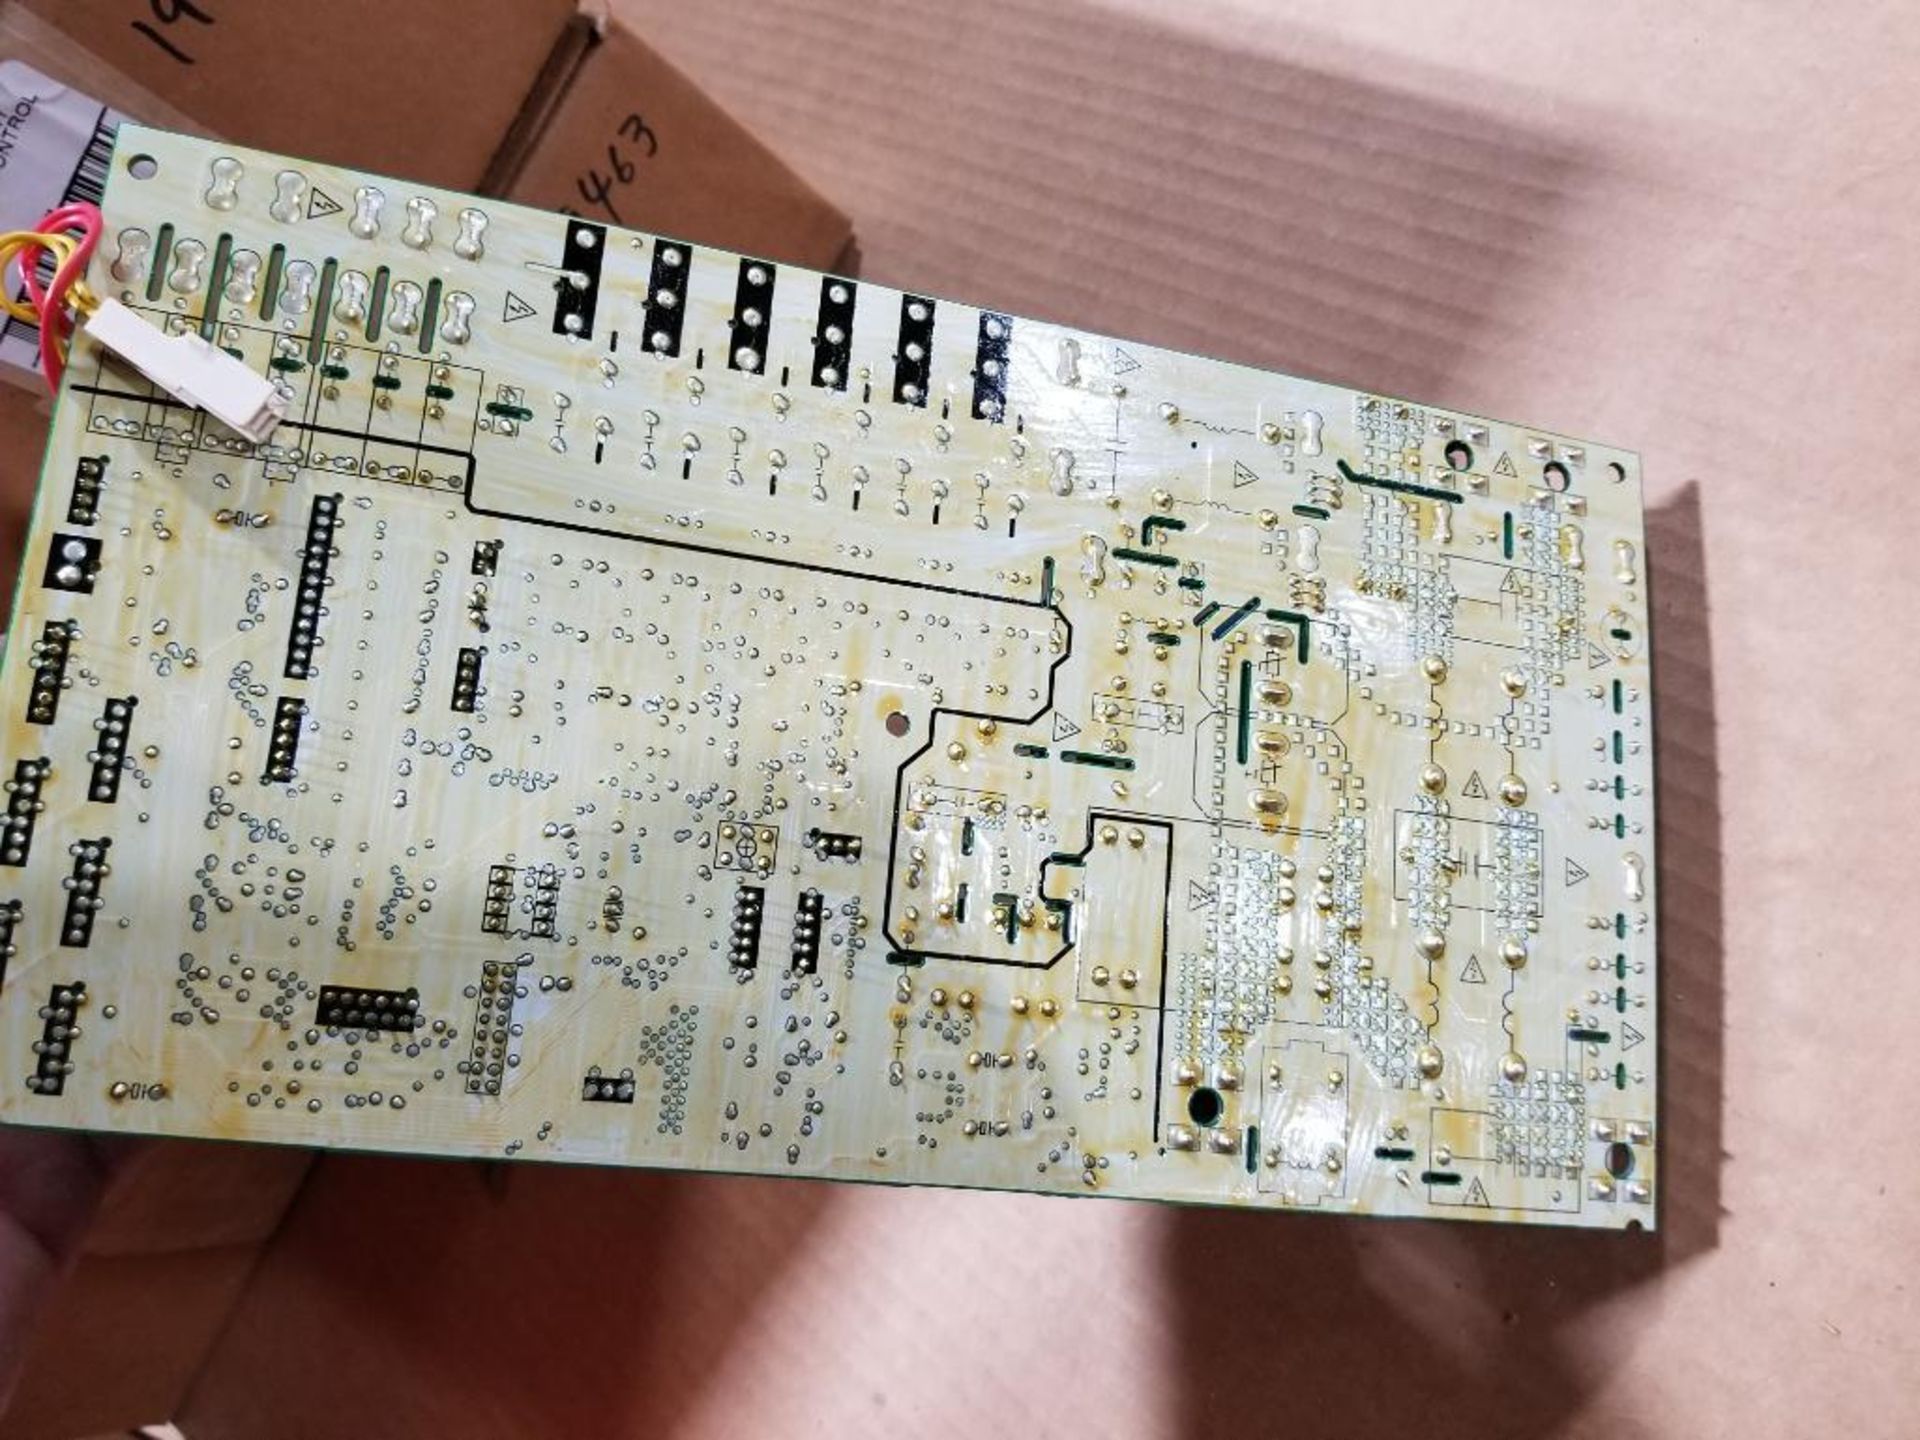 Qty 7 - Main control board. Part number 17122000A18547. - Image 12 of 12